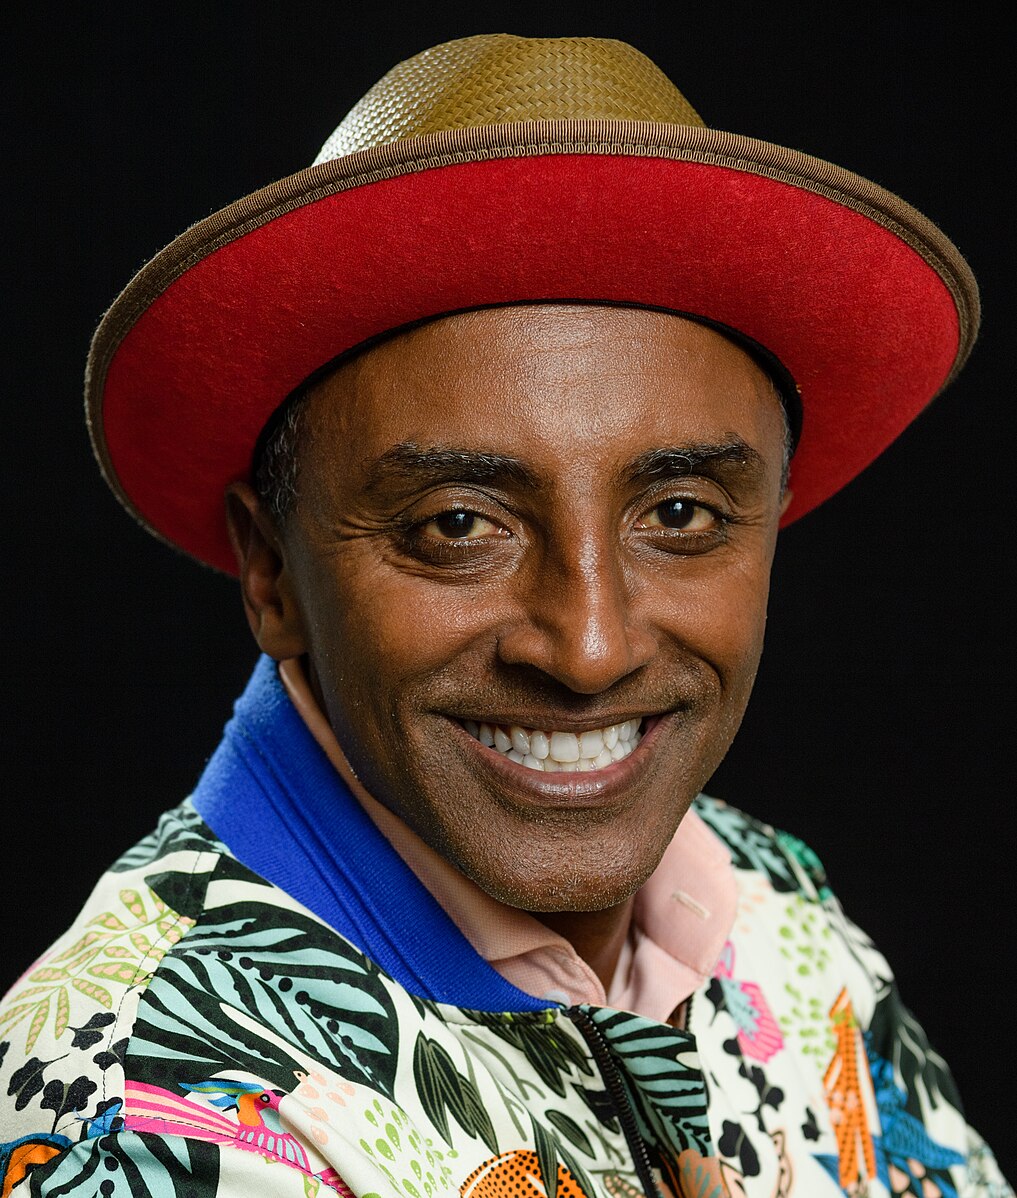 The world-renowned chef and philanthropist, Marcus Samuelsson, is the graduation speaker for this year.

Marcus Samuelsson at the Montclair Film Festival 2022 by Neil Grabowsky, hosted by Montclair Film, taken on 27 October 2022, available under a CC BY 2.0 license via Flickr.